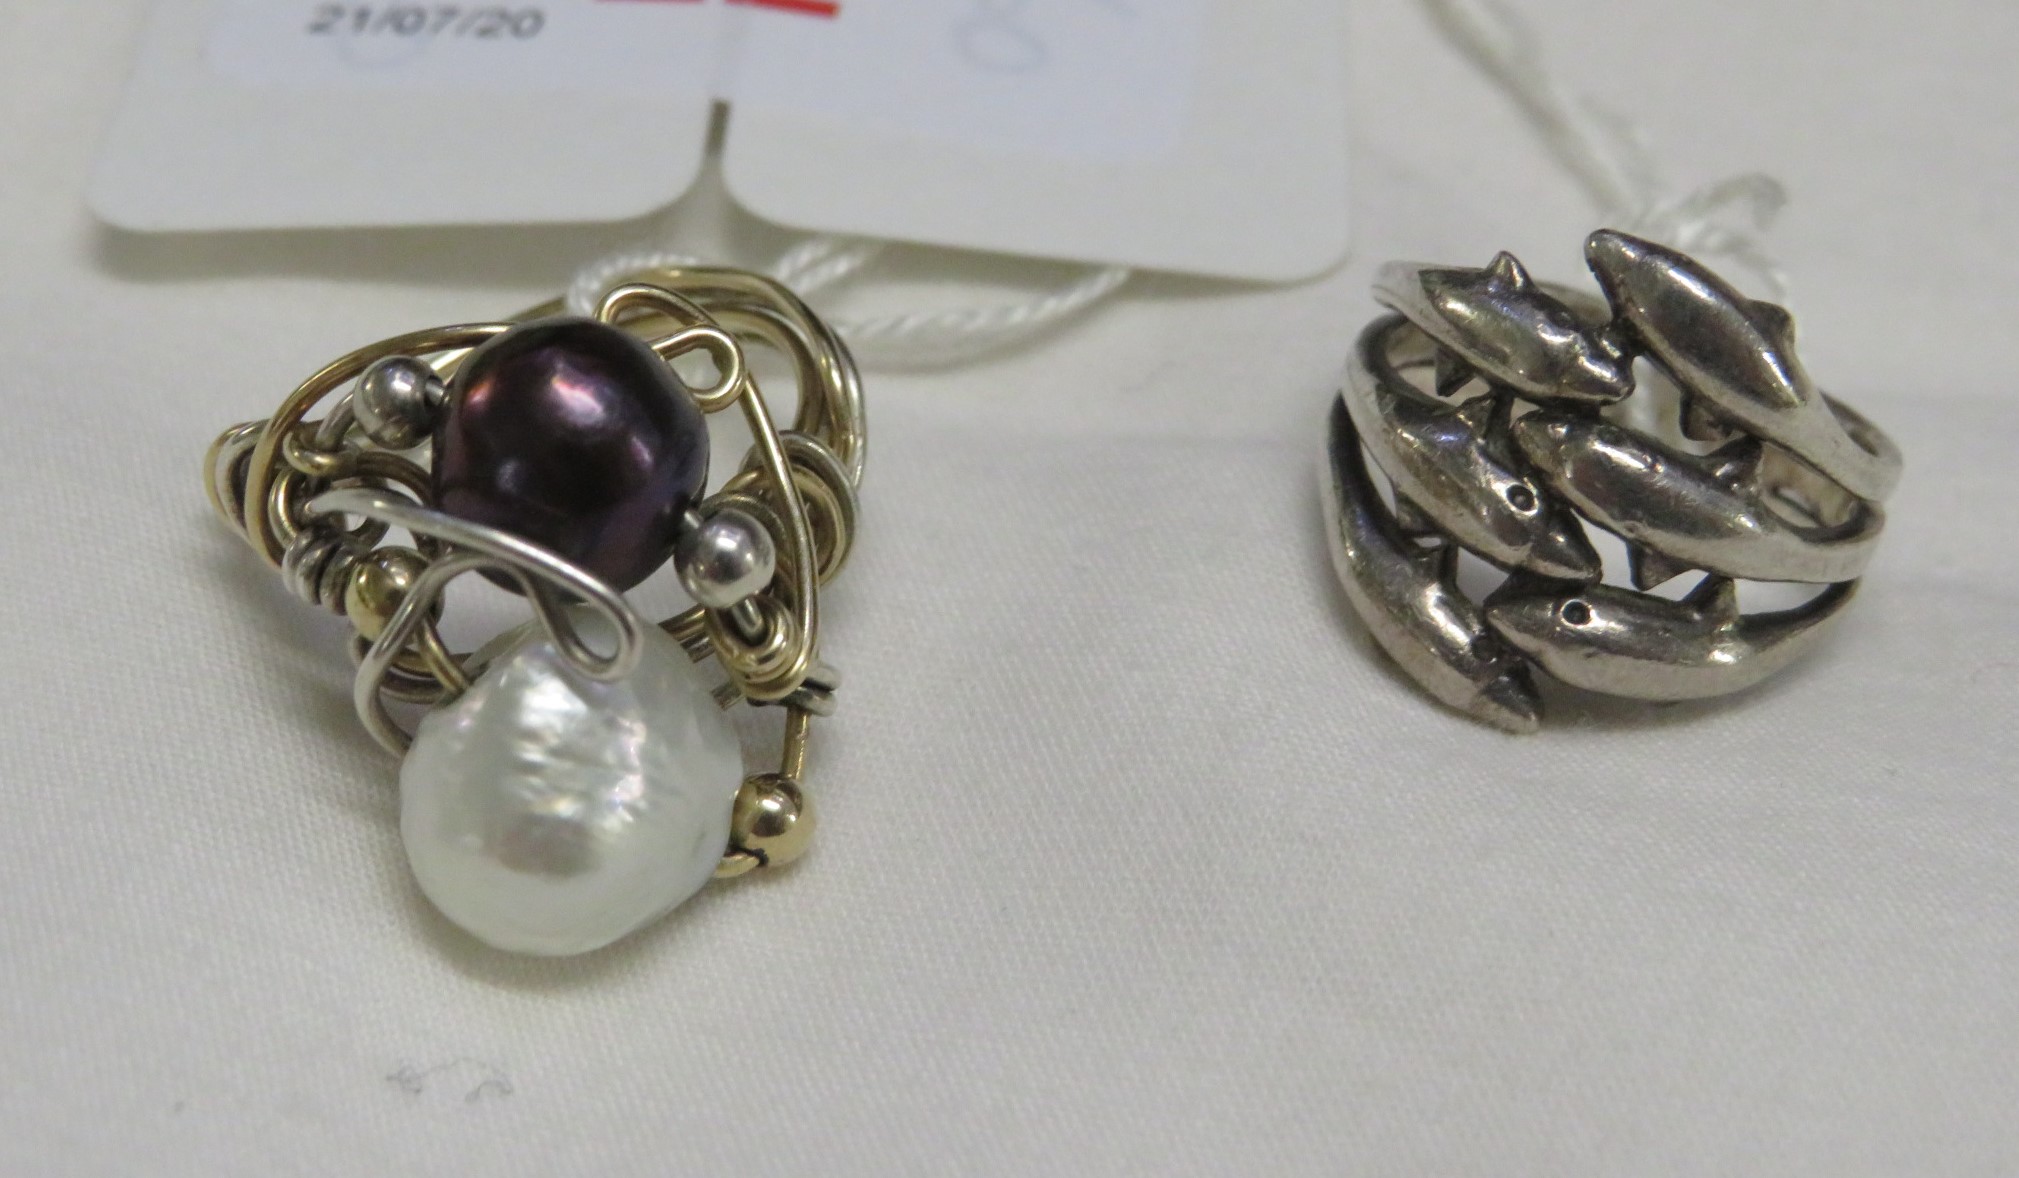 925 WHITE METAL RING IN THE FORM OF DOLPHINS, AND A WIRE RING WITH TWO PEARLS